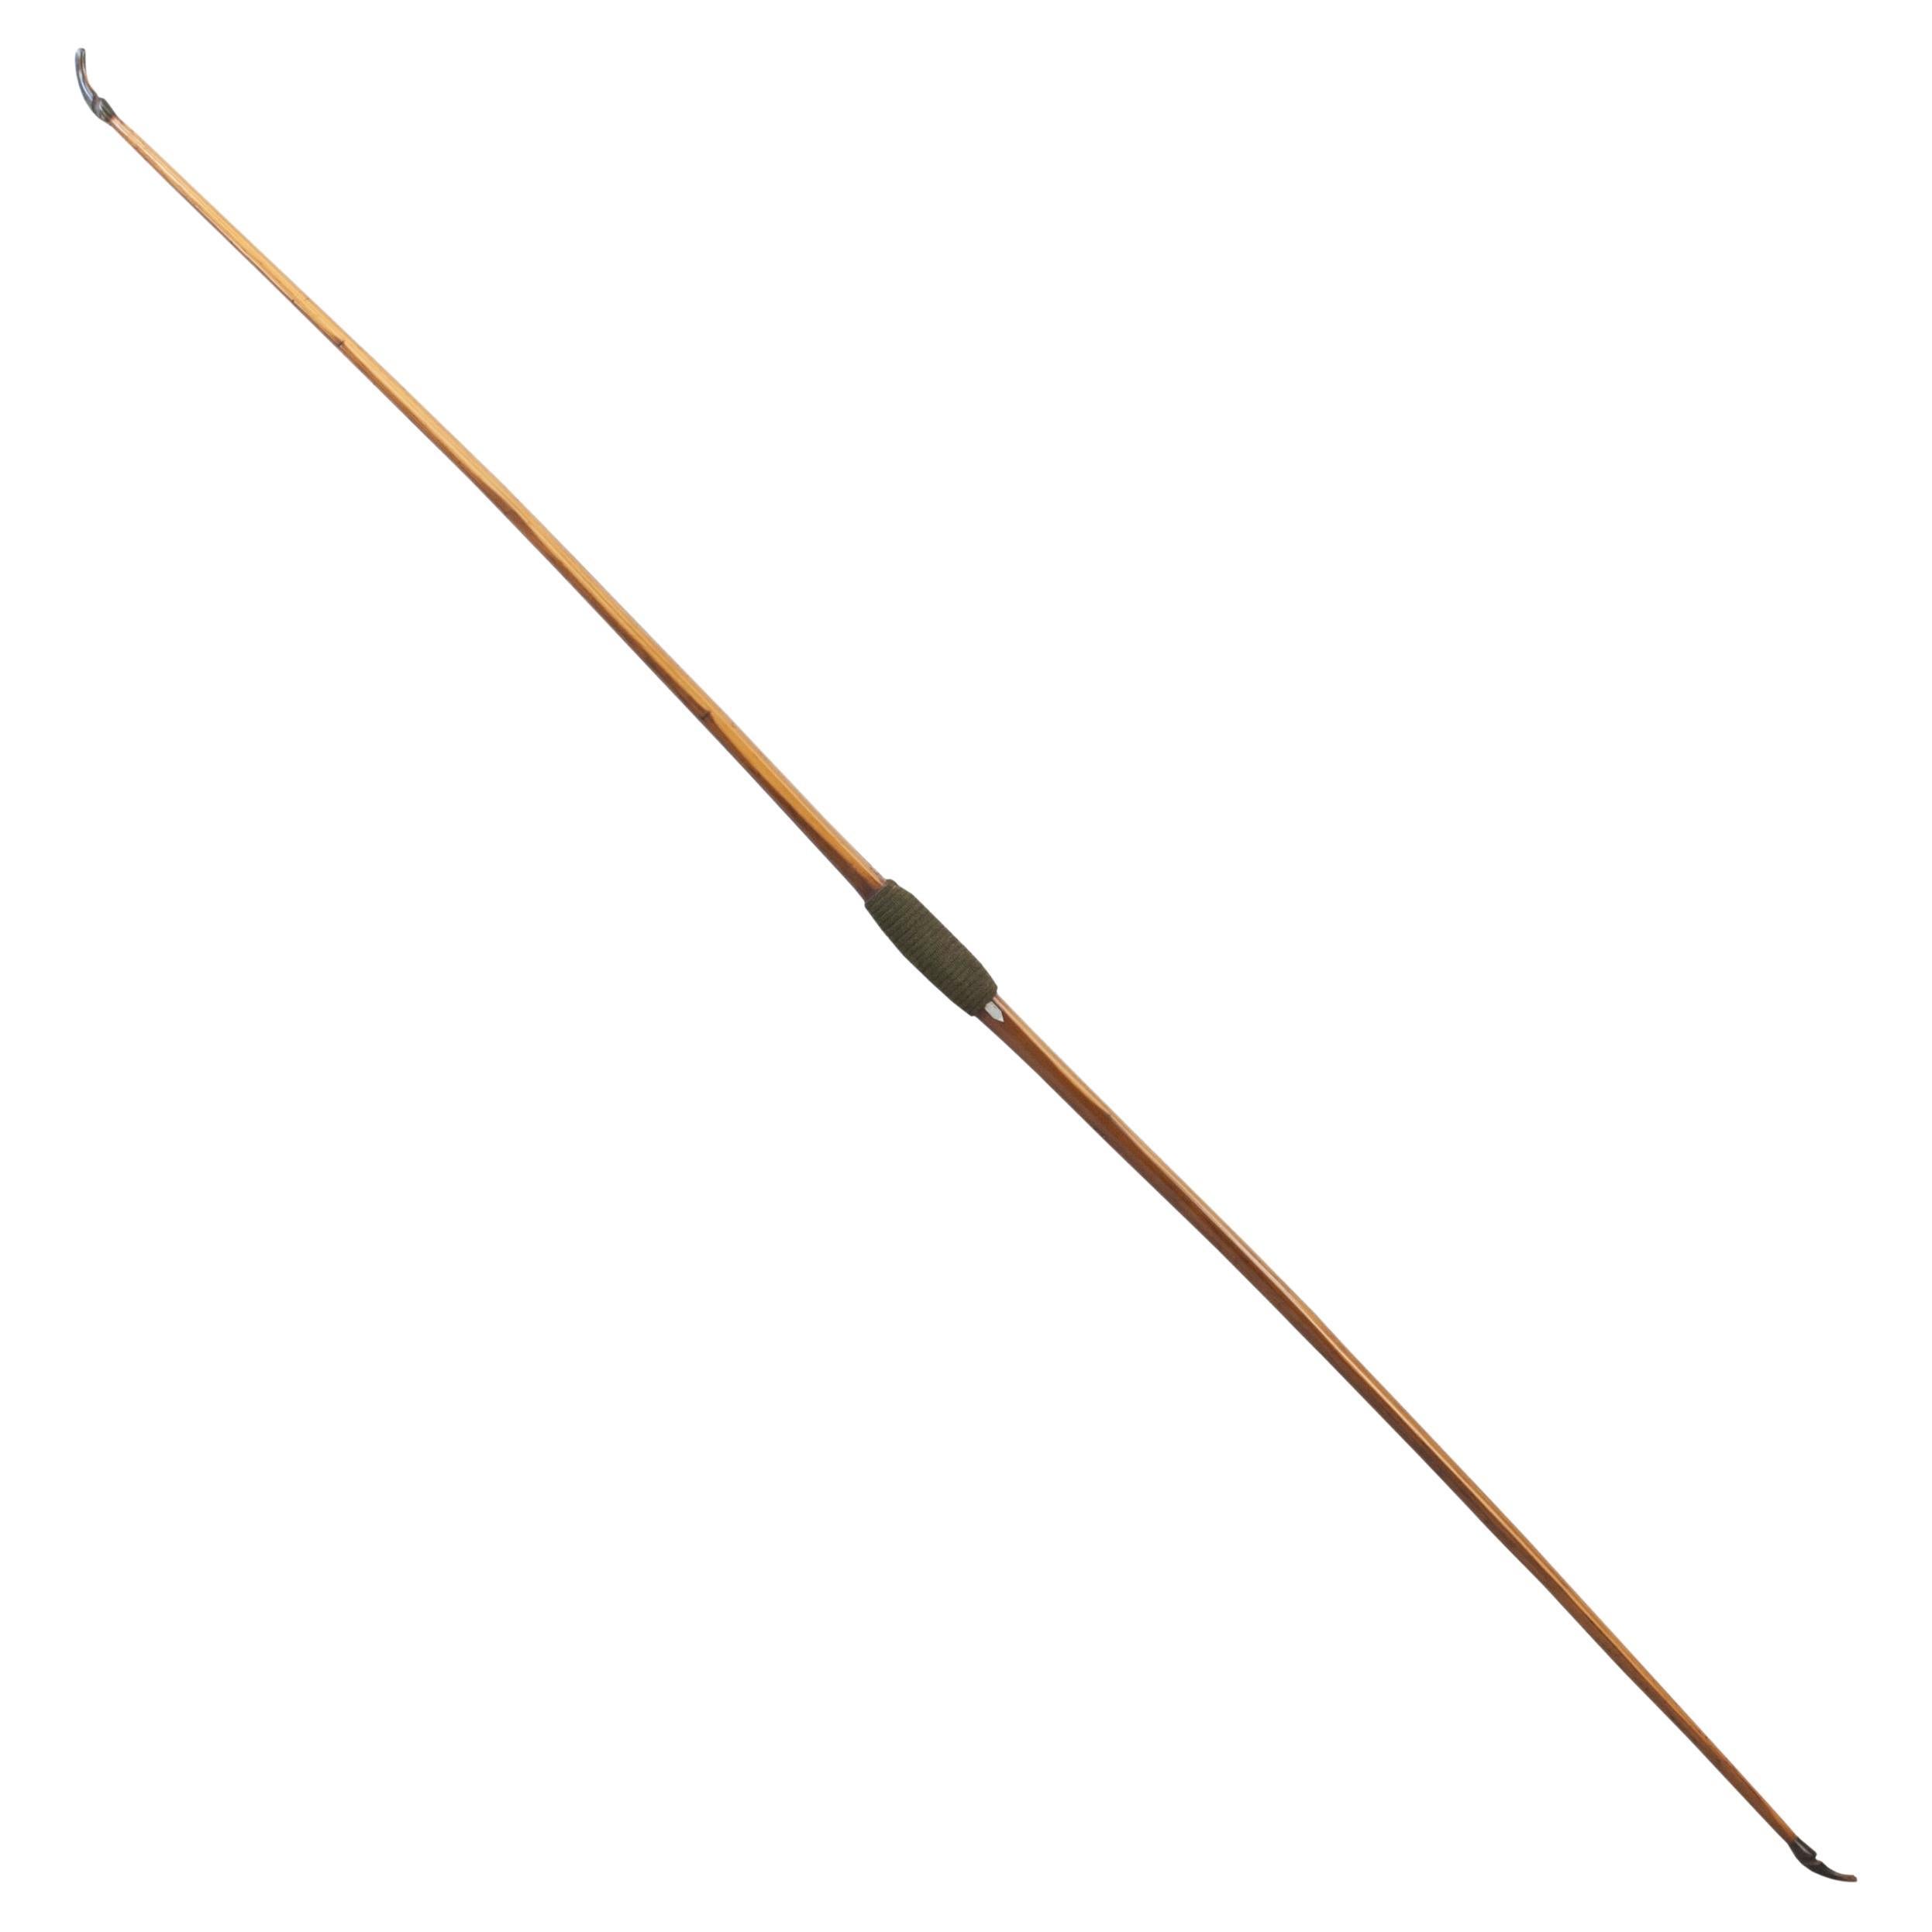 Antique Yew Wood Long Bow, Archery For Sale